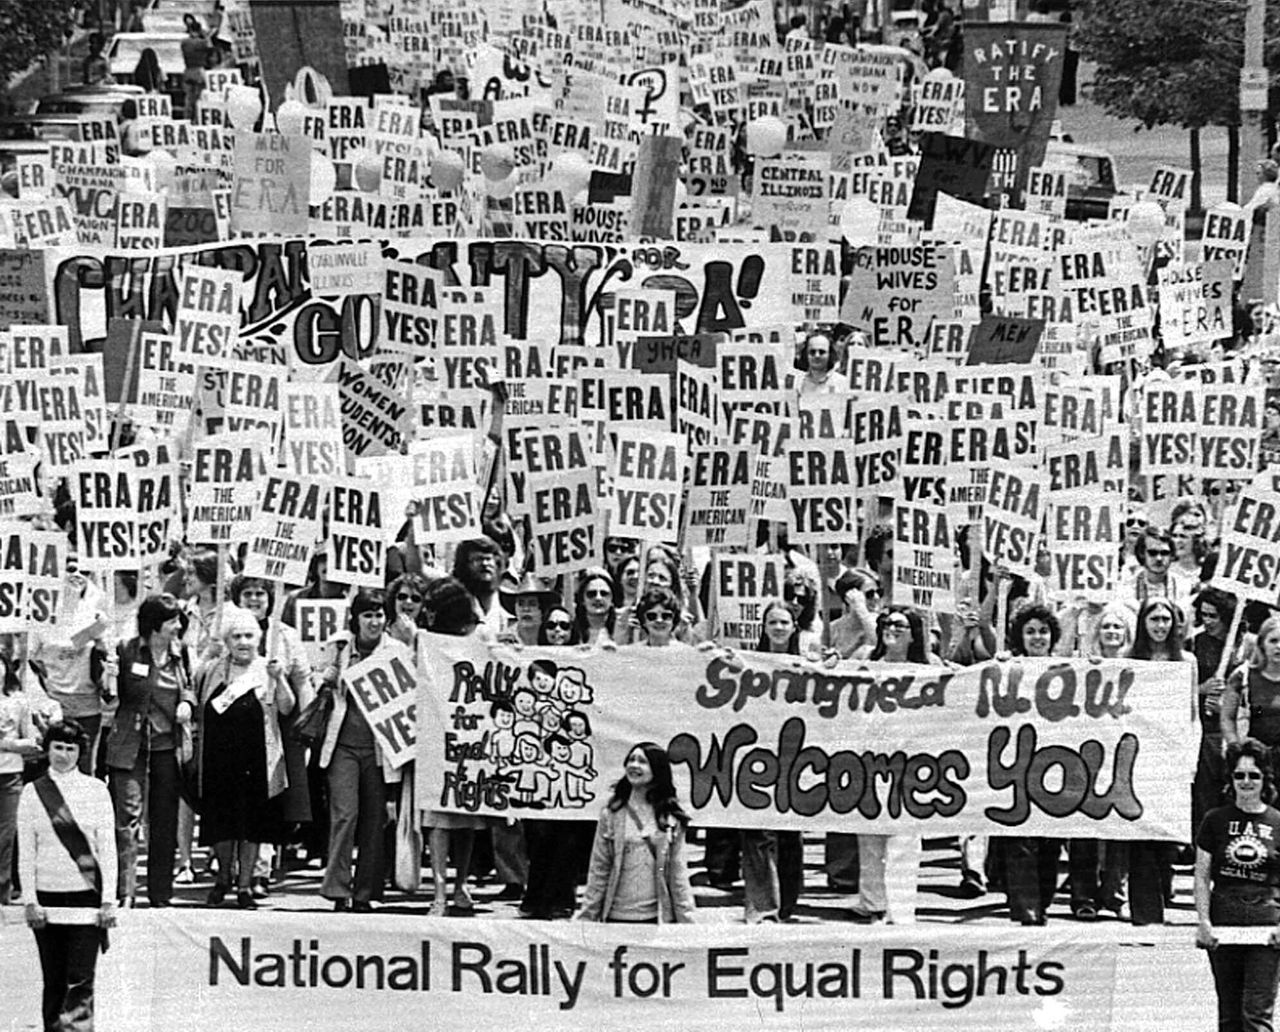 An estimated 10,000 marchers descend on the Capitol building in Springfield, Illinois, to demonstrate for the passage of the Equal Rights Amendment in May 1976.